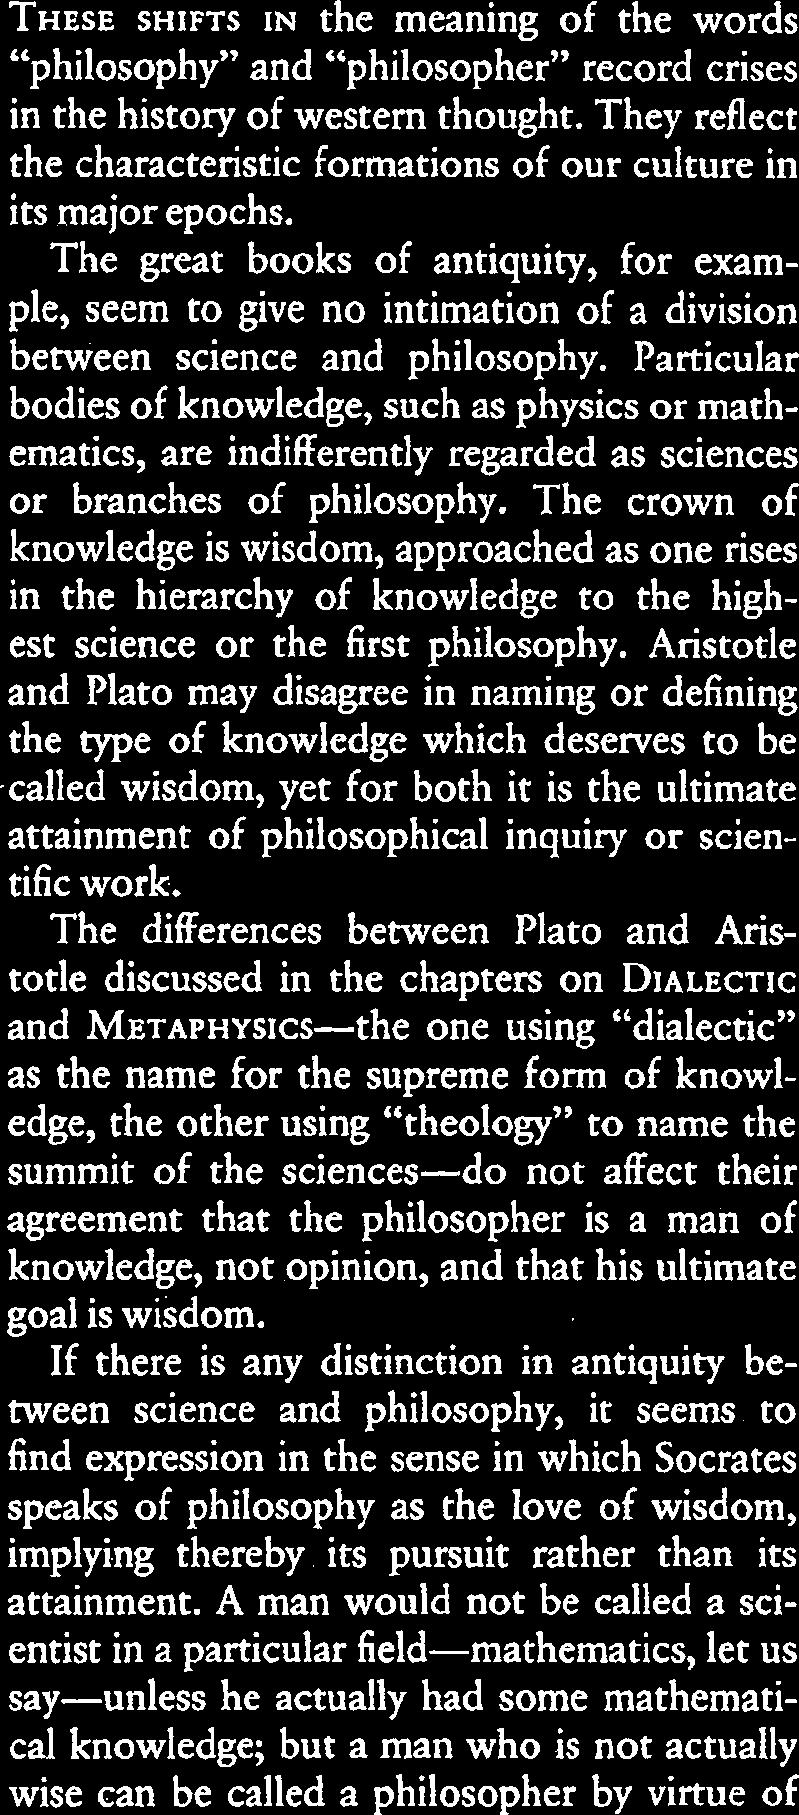 " The dismissal of philosophy as useless, or at best ornamental, in the practical affairs of society is sharply opposed to the vision of an ideal state which can come to pass only if philosophers are